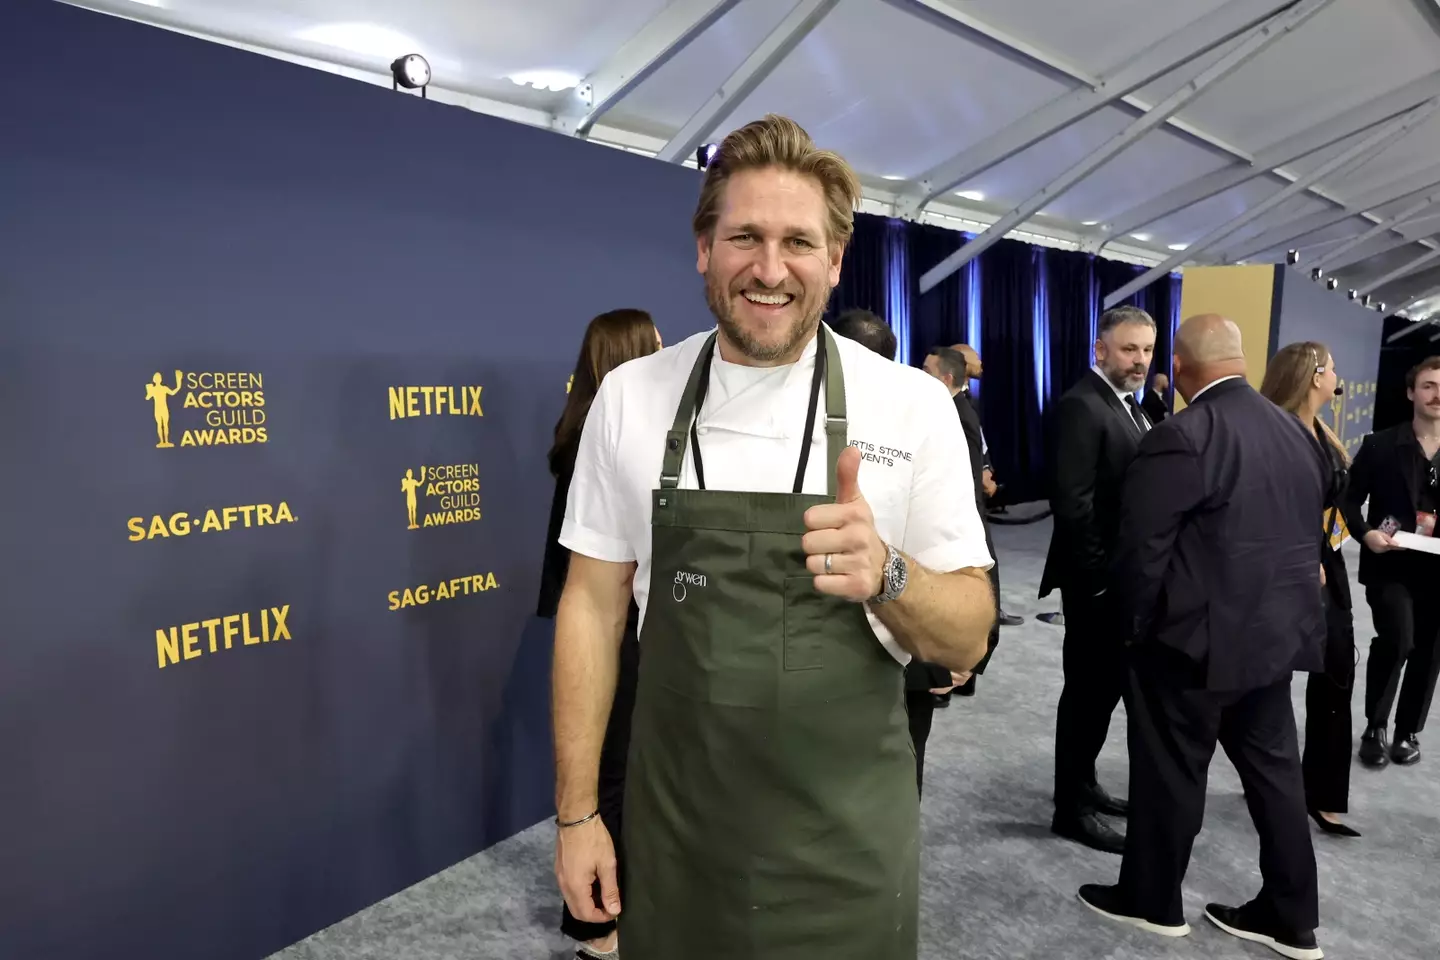 Curtis Stone is fine with you eating fast food in small doses, as long as you know not to have too much. (Kevin Winter/Getty Images)